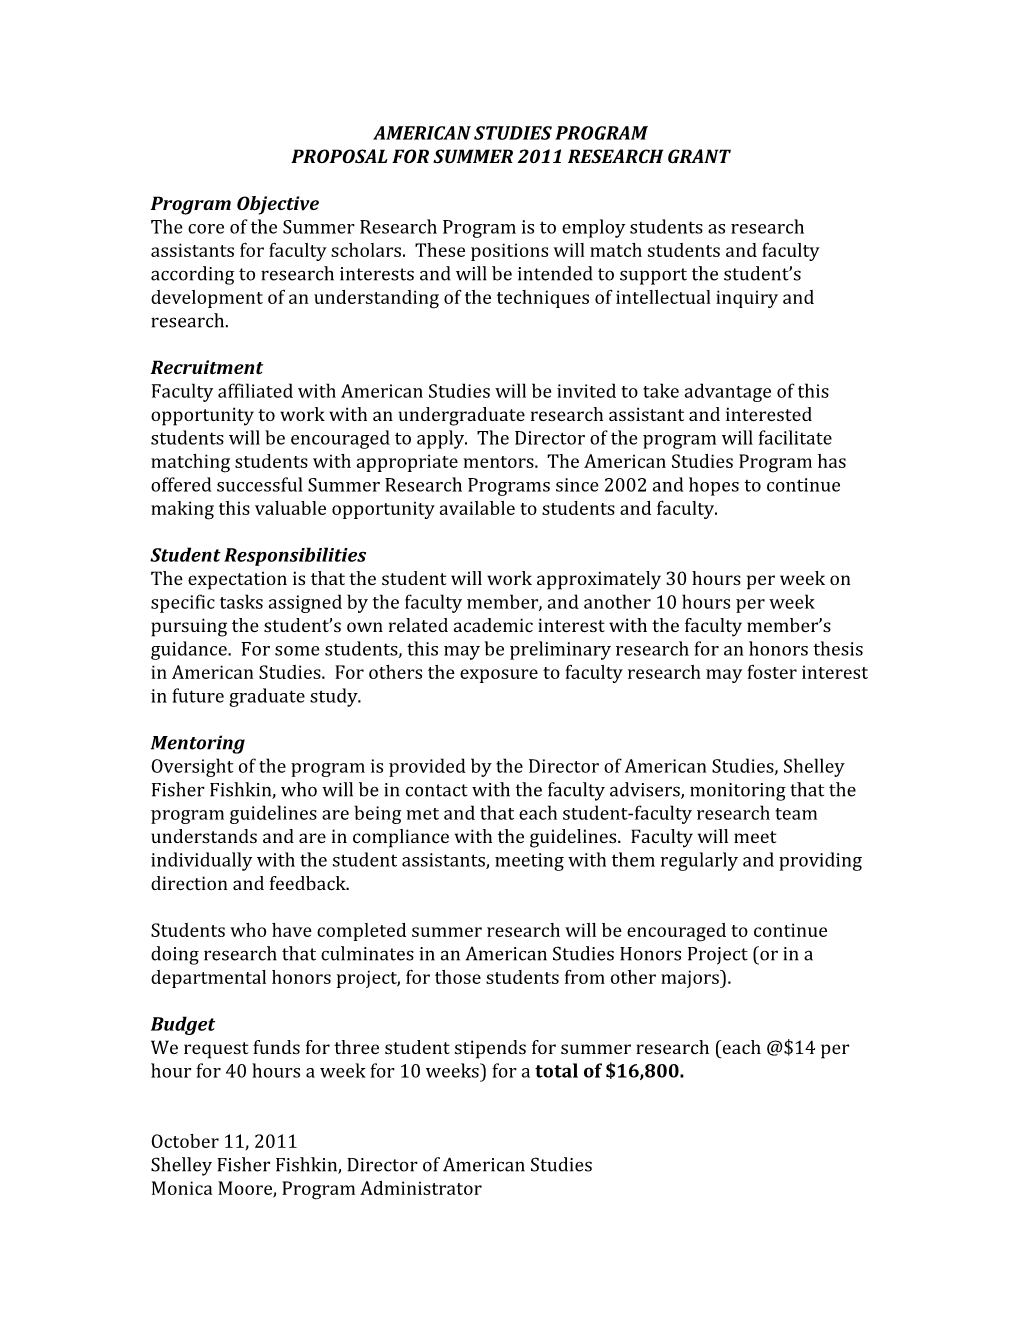 AMERICAN STUDIES PROGRAM PROPOSAL for SUMMER 2011 RESEARCH GRANT Program Objective the Core of the Summer Research Program Is To